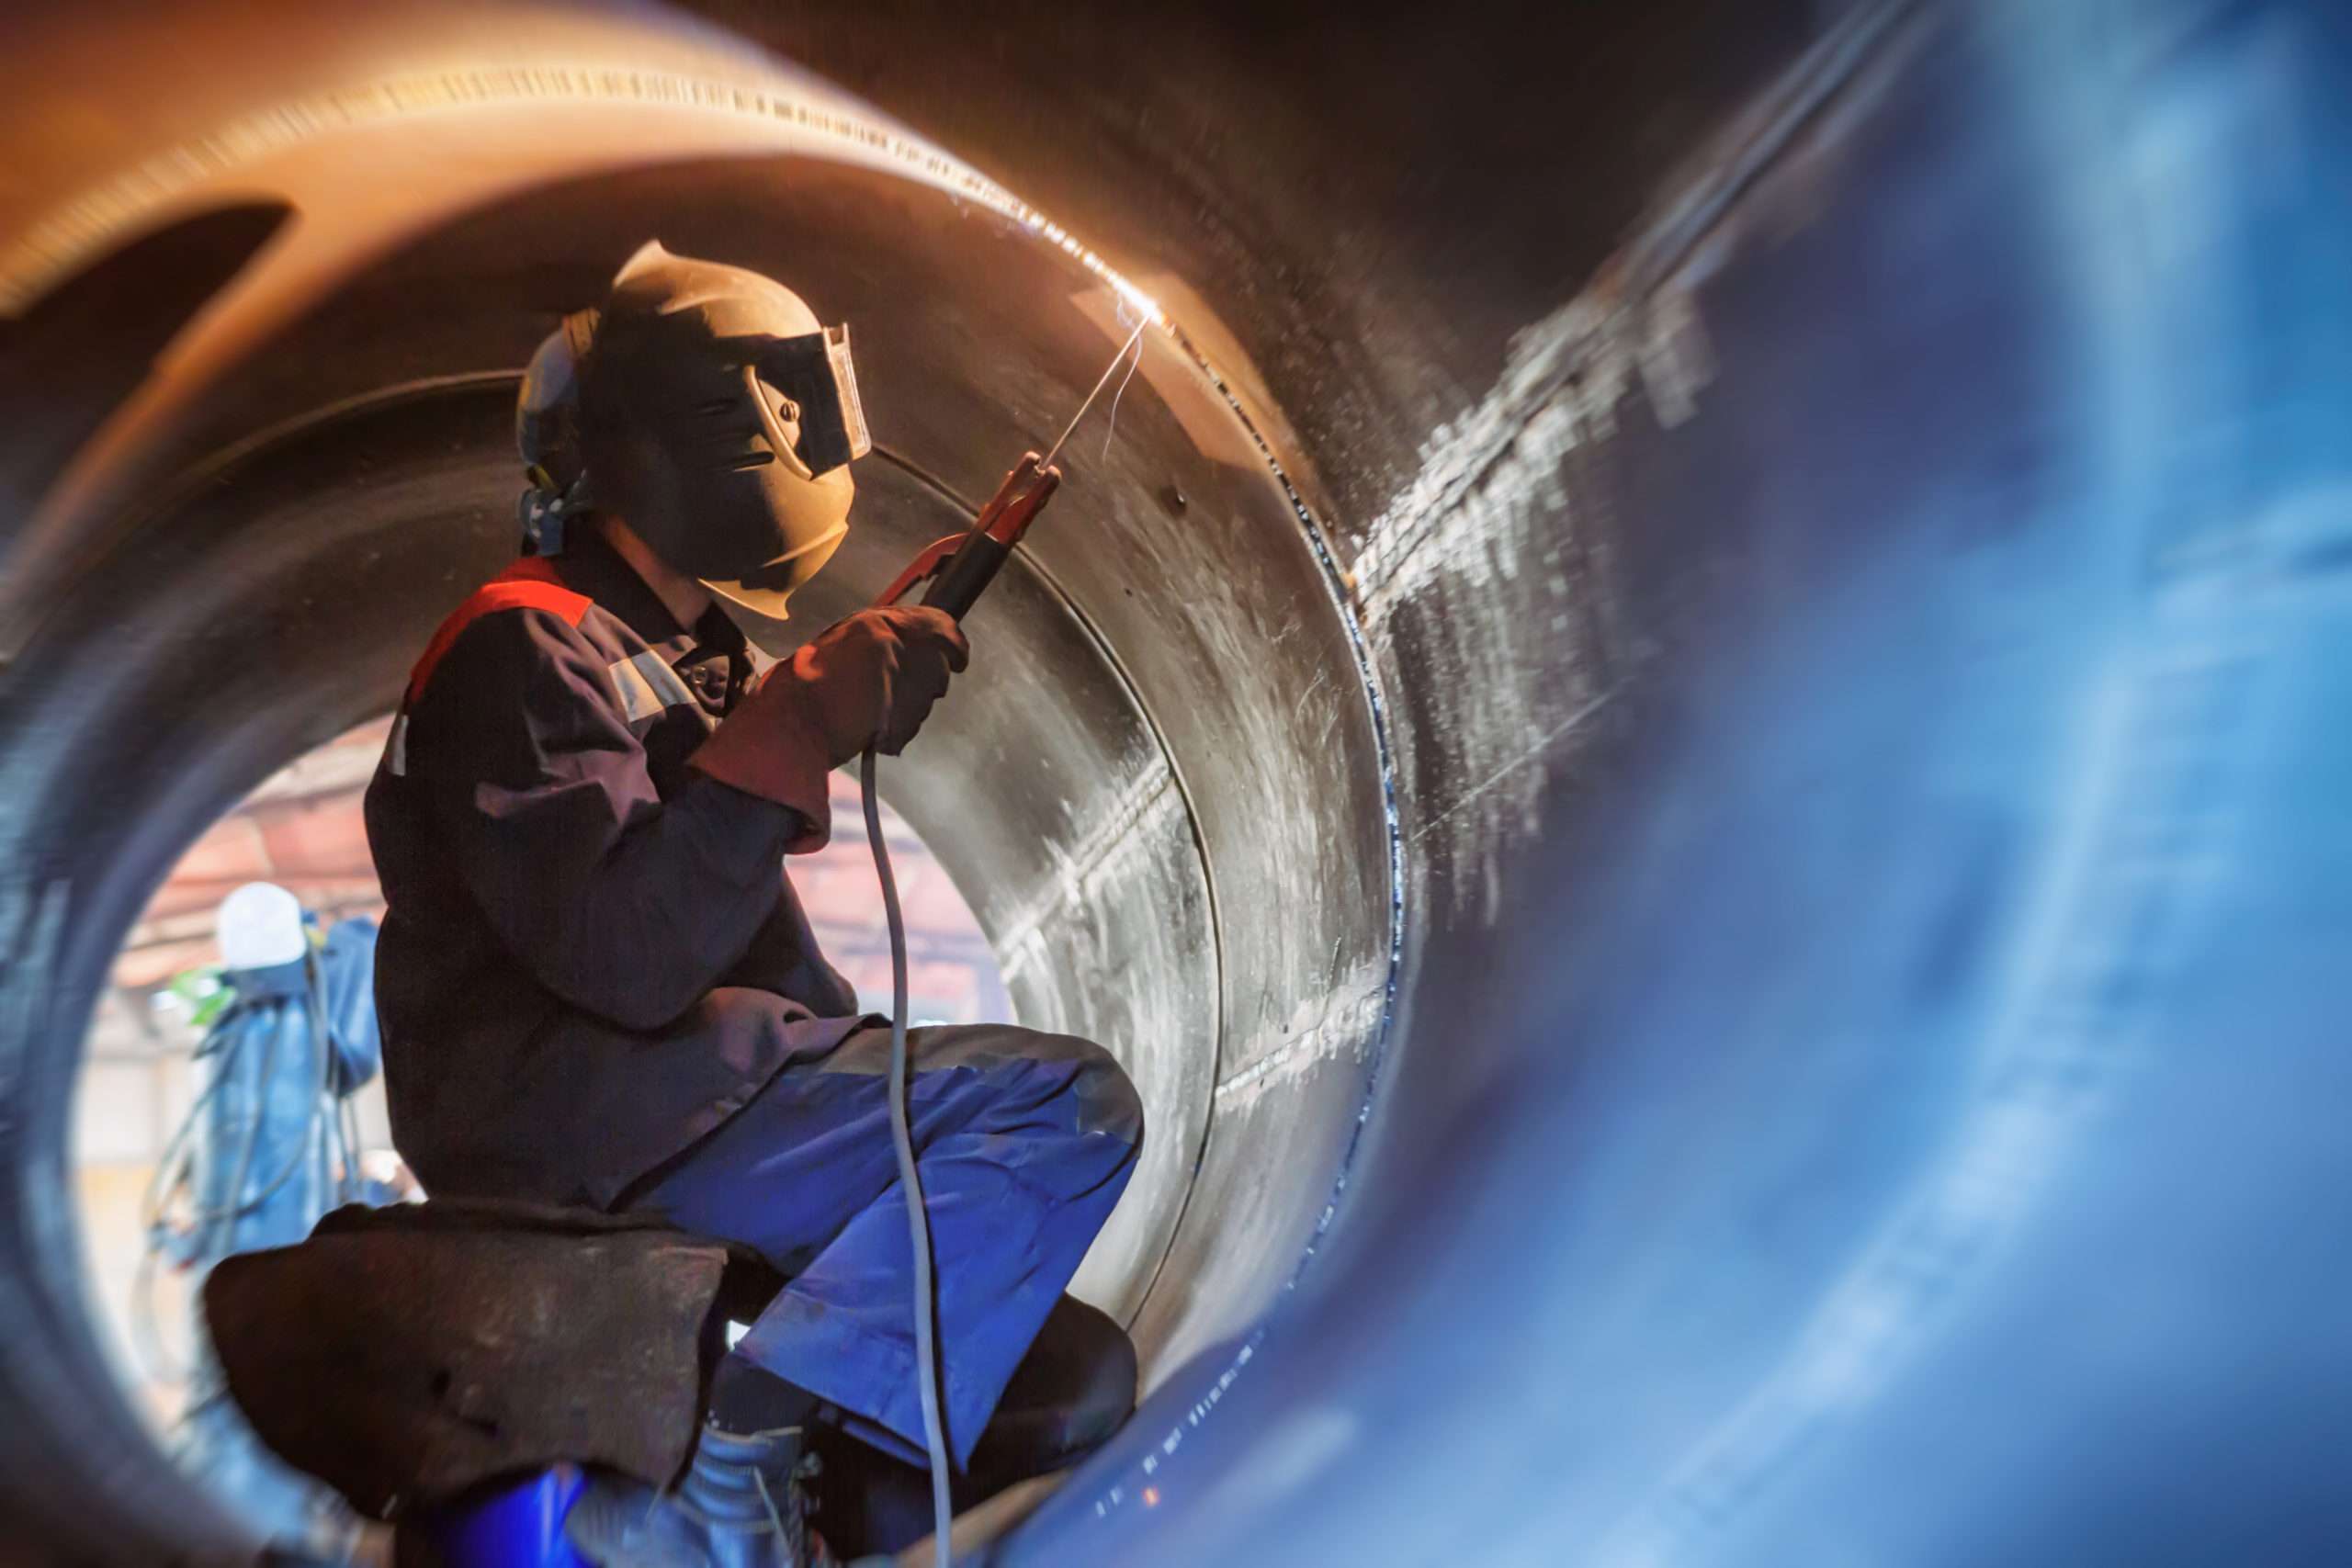 Welding in a dangerous unconditioned space